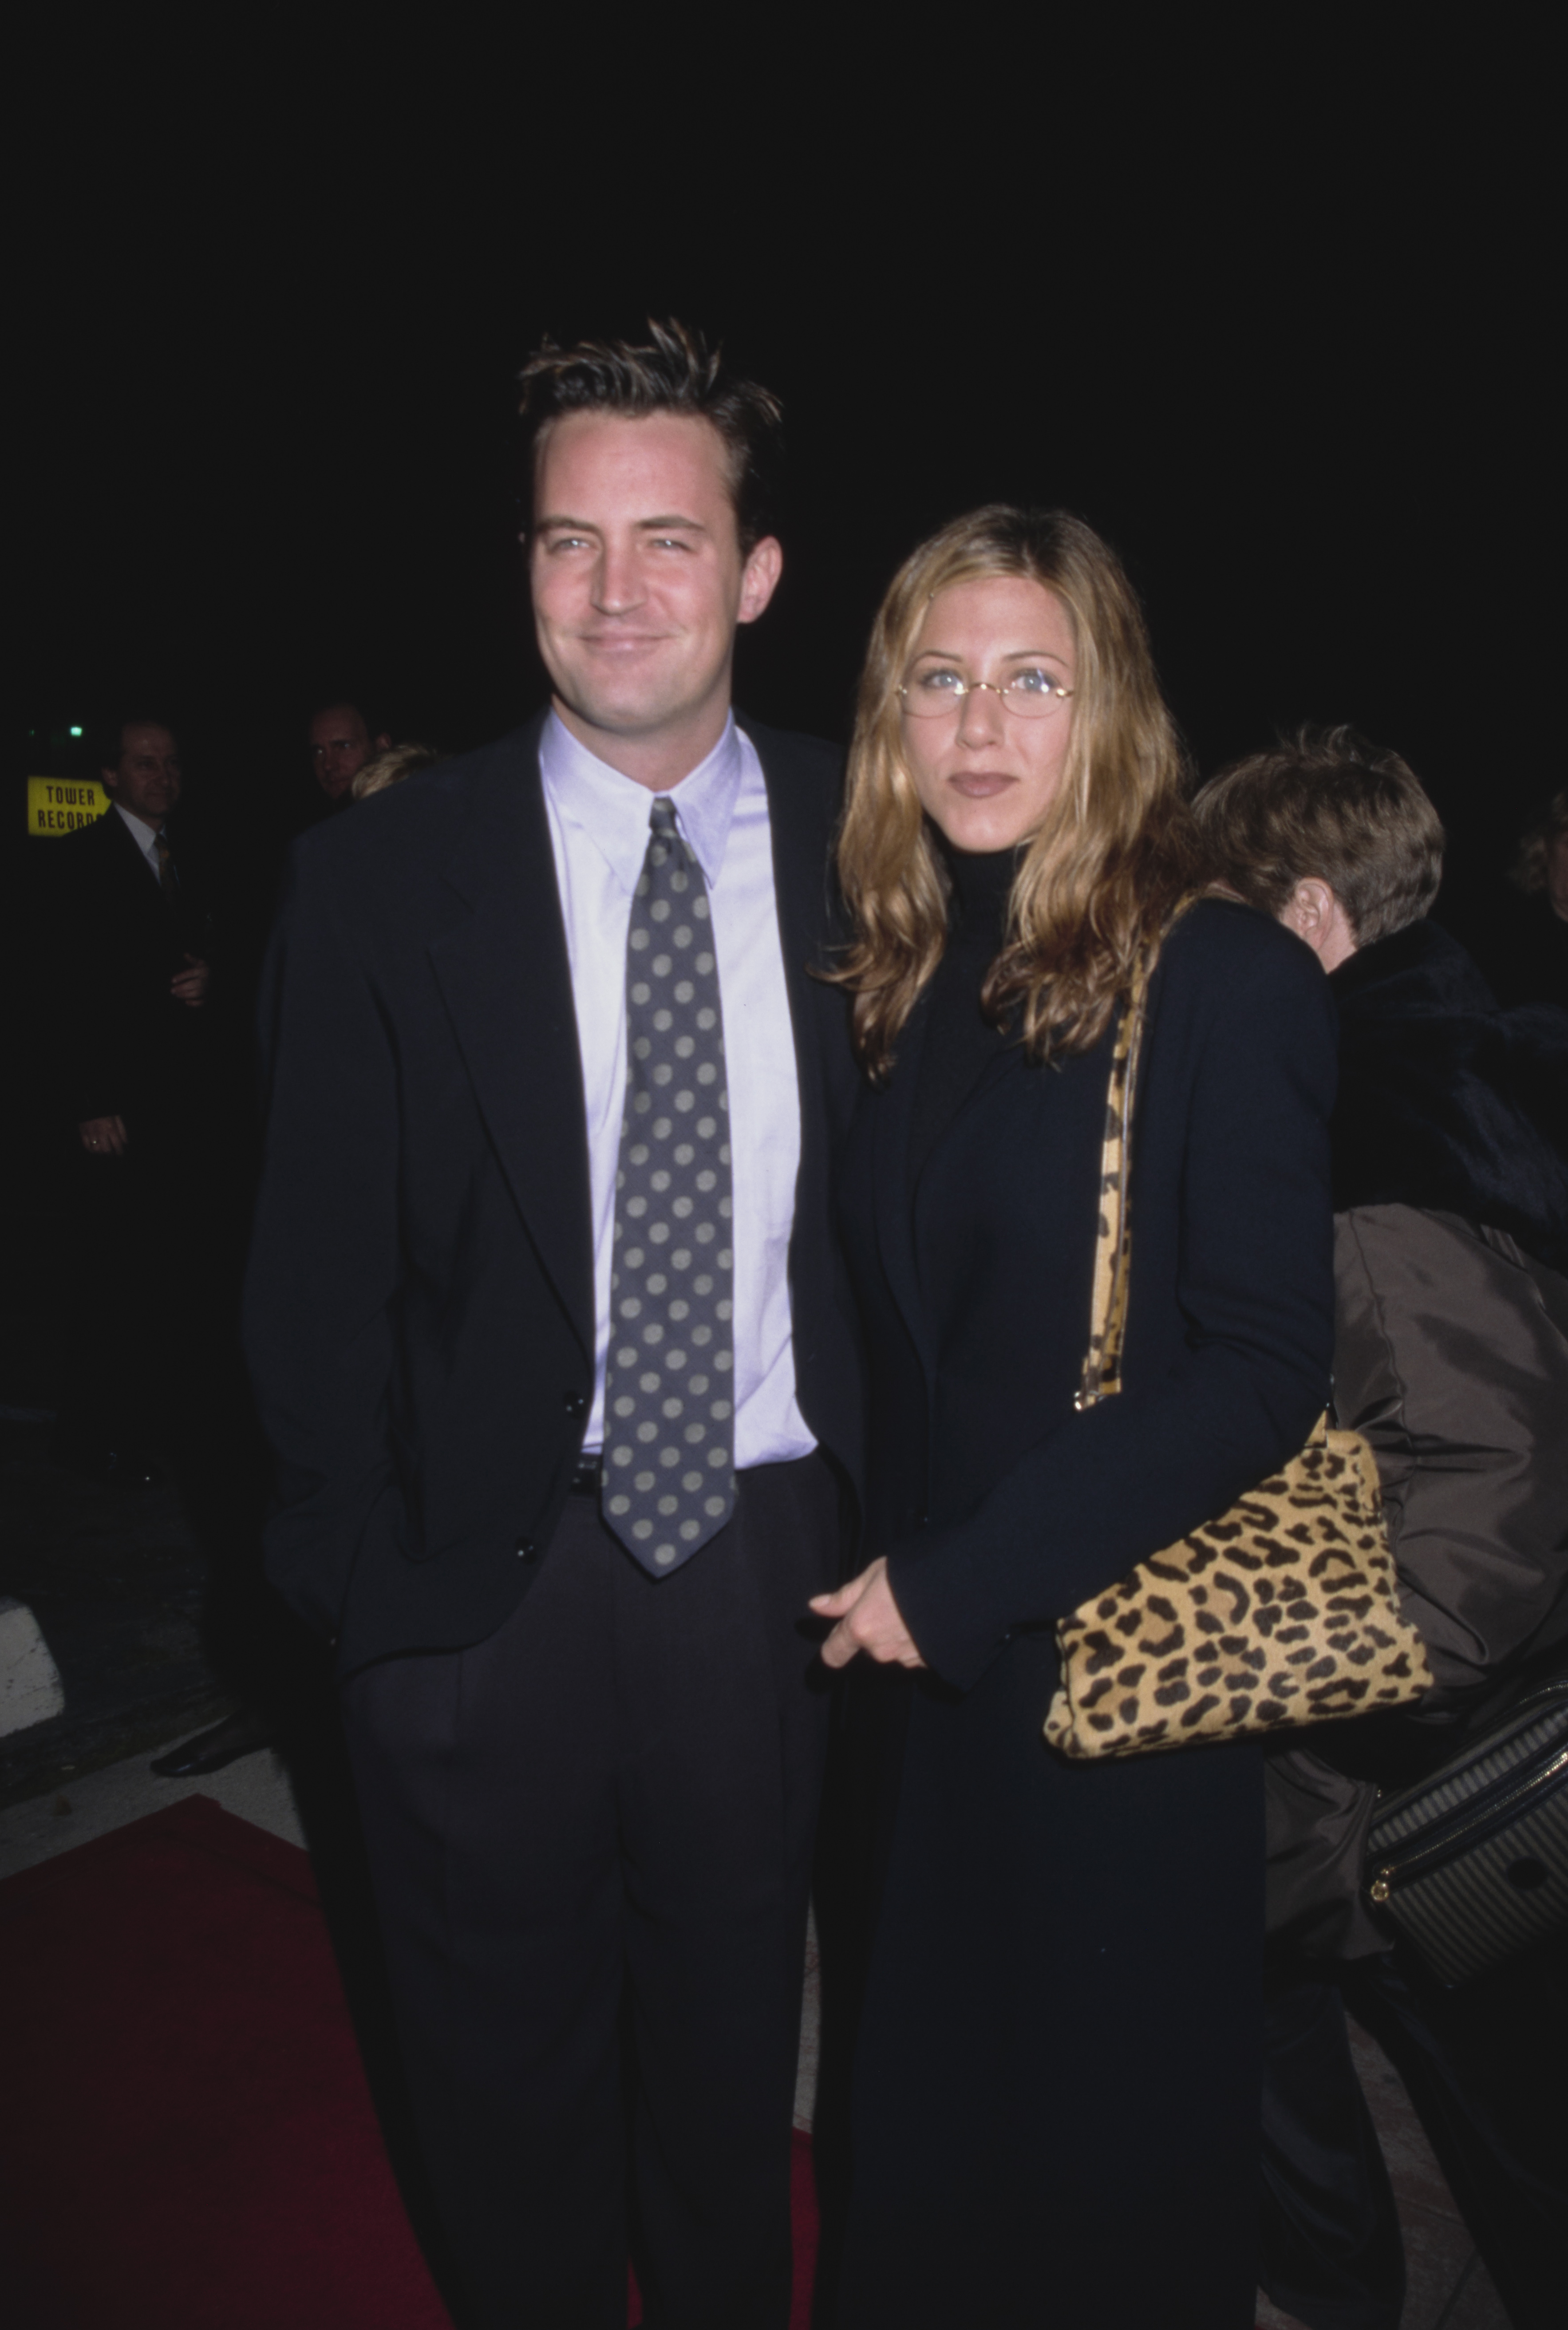 Matthew Perry and Jennifer Aniston at the premiere of "Kissing a Fool" in Los Angeles, California on February 18, 1998. | Source: Getty Images